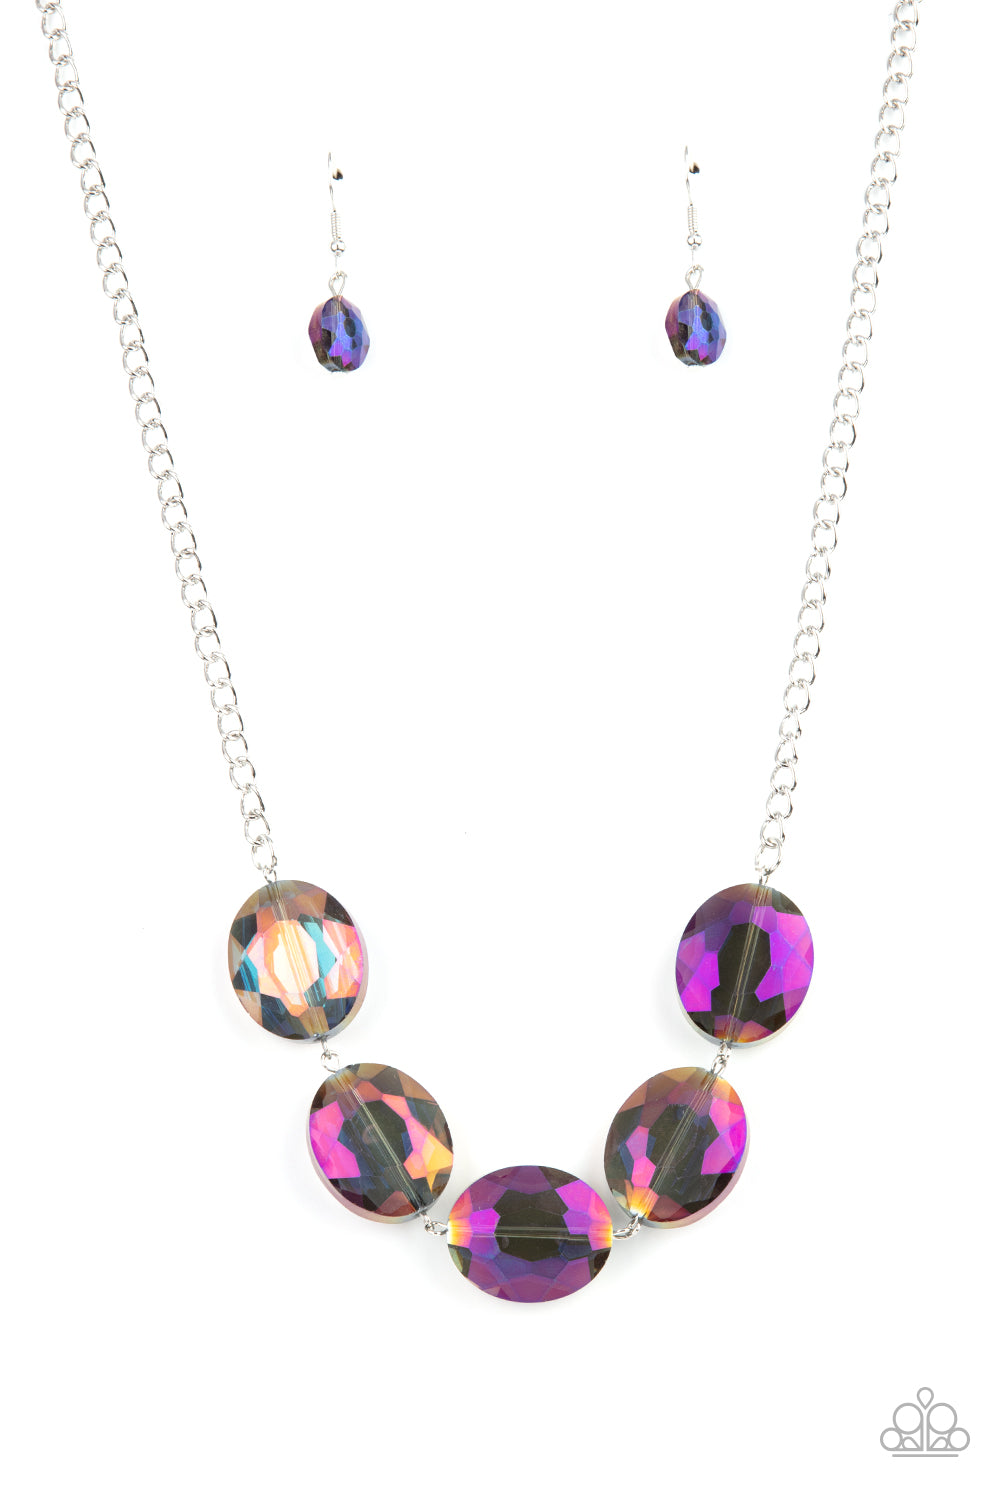 Cosmic Closeup Purple Necklace - Paparazzi Accessories  Brushed in a purple oil spill finish, a faceted collection of oversized iridescent gems delicately links below the collar for a gritty glamorous look. Features an adjustable clasp closure.  All Paparazzi Accessories are lead free and nickel free!  Sold as one individual necklace. Includes one pair of matching earrings.